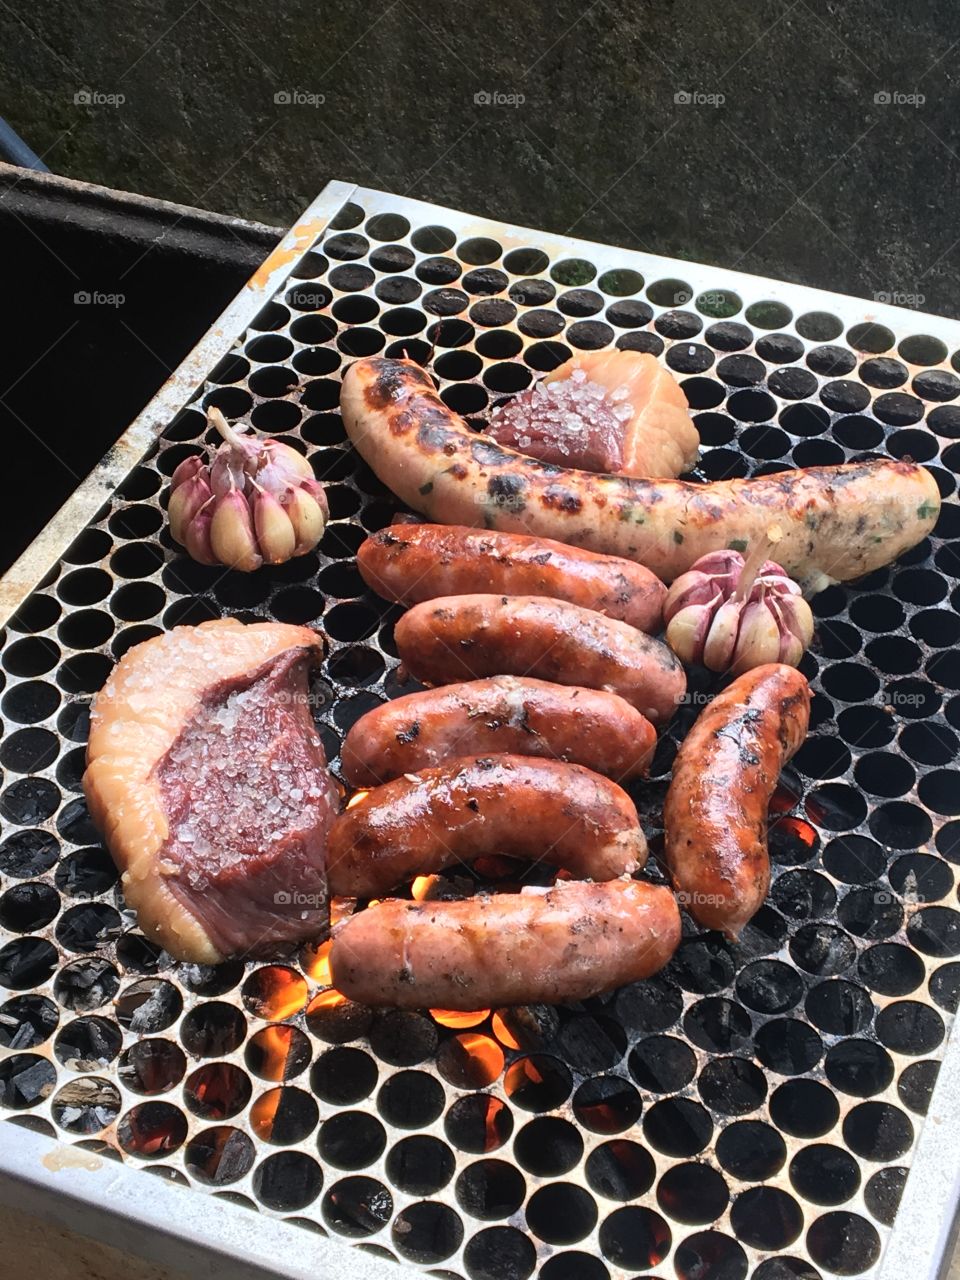 barbecue, barbecue, meat, sausage, picanha, fire, Weekend, family 